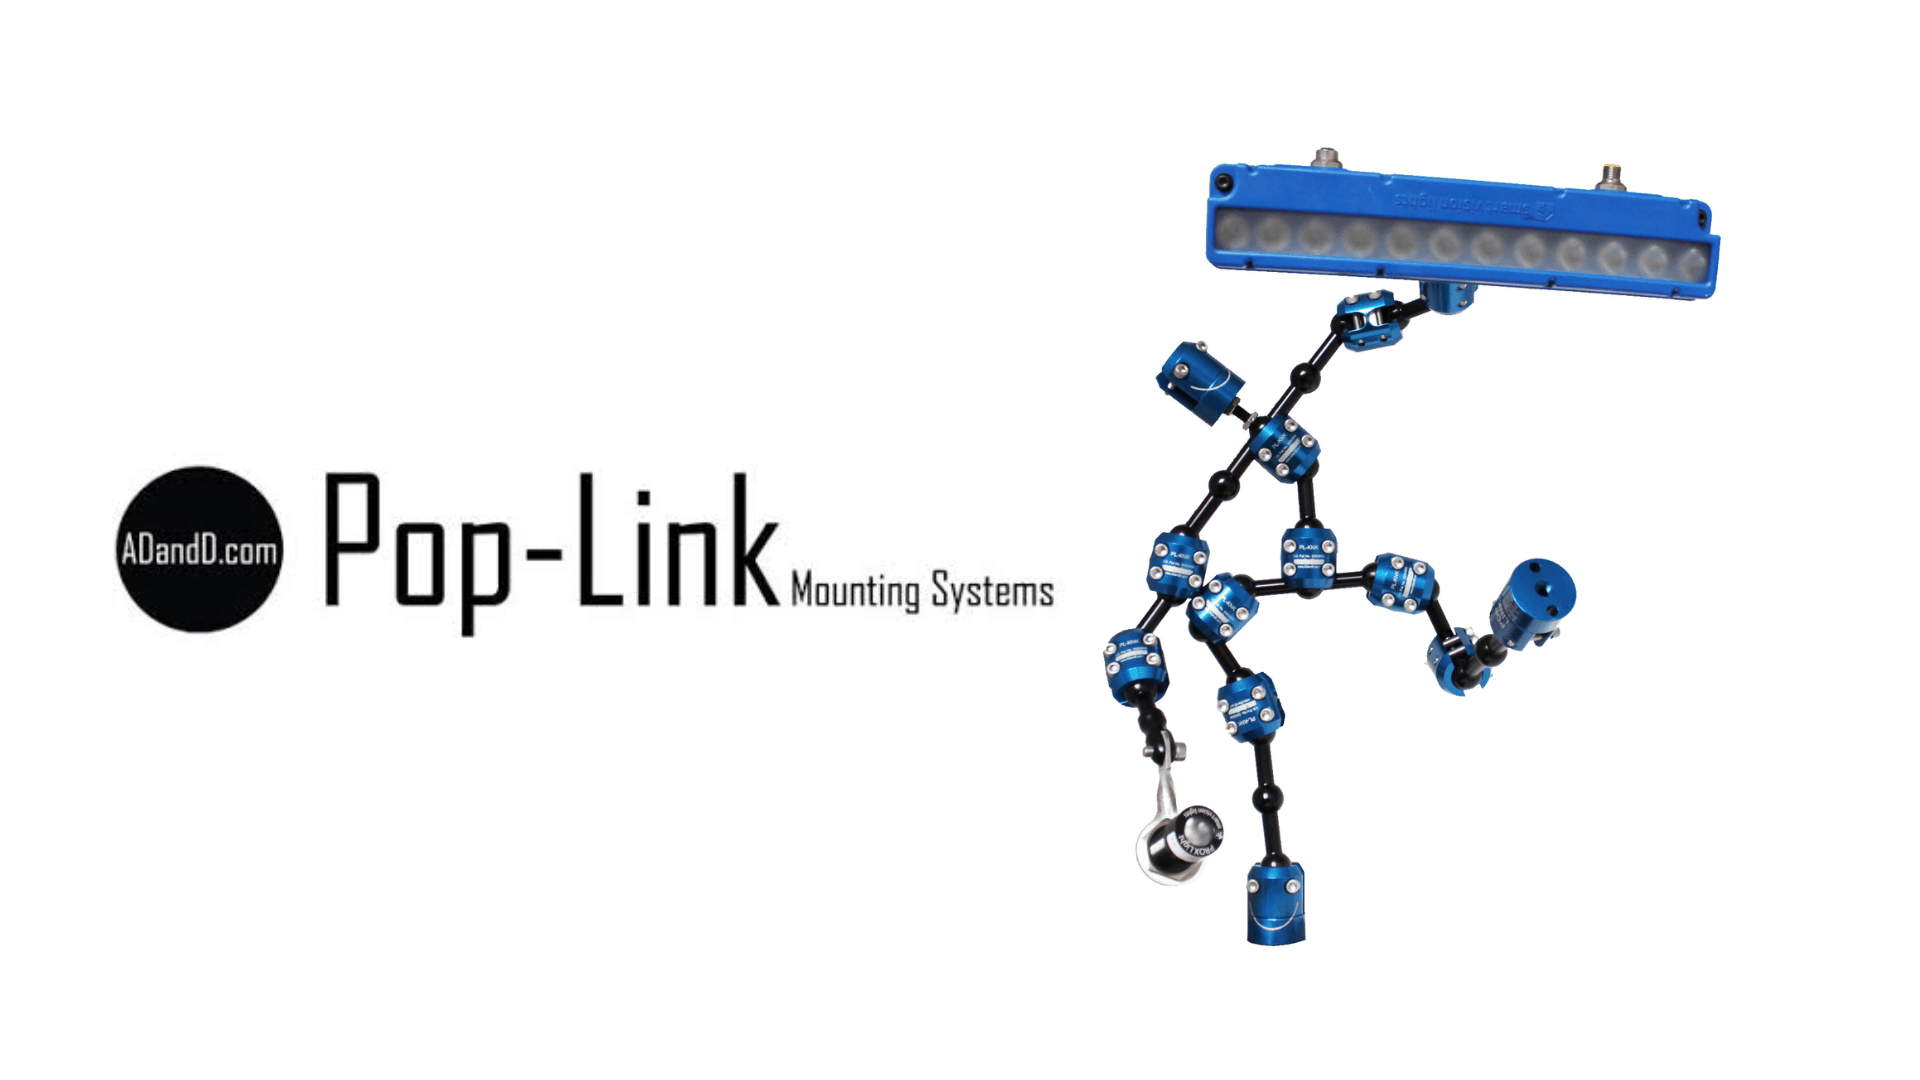 ADandD launches pop-link mounting systems product configurator of 3d cad downloads